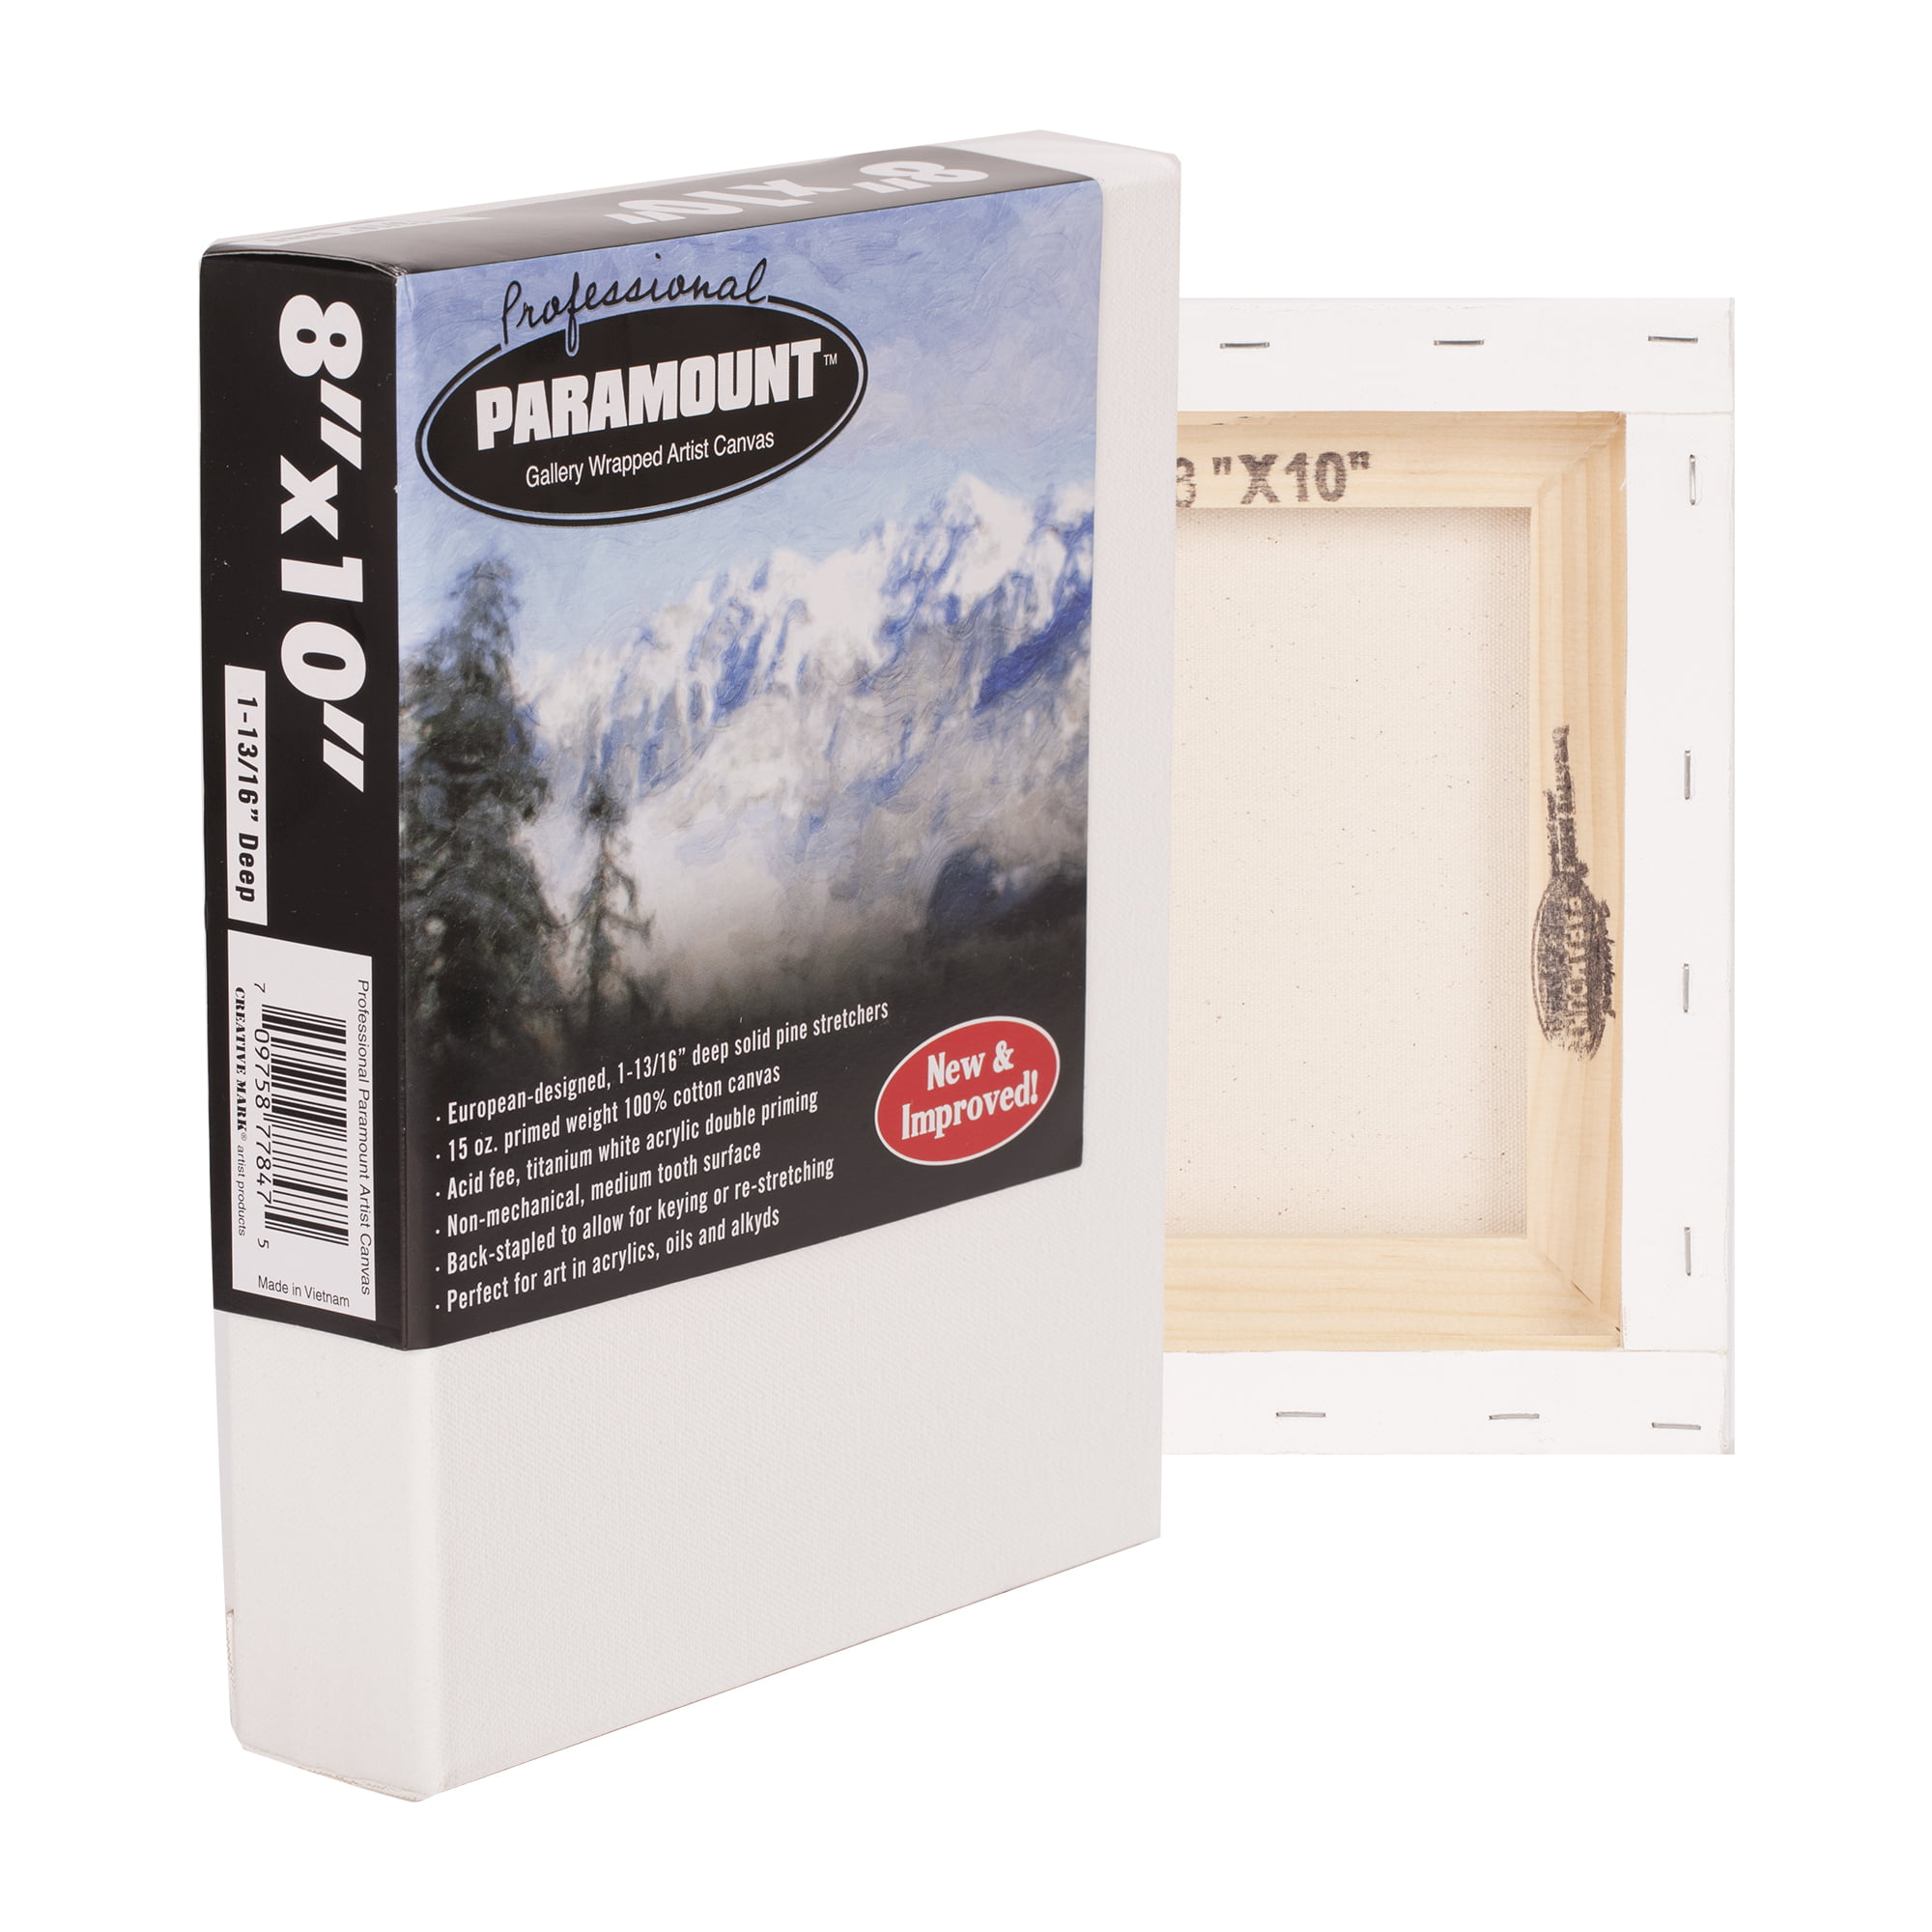 Paramount Professional 1-13/16 Deep Gallery Wrap Canvas - Professional  Cotton Canvas for Acrylics, Painting, Oils, Artists, & More! - [Box of 3 